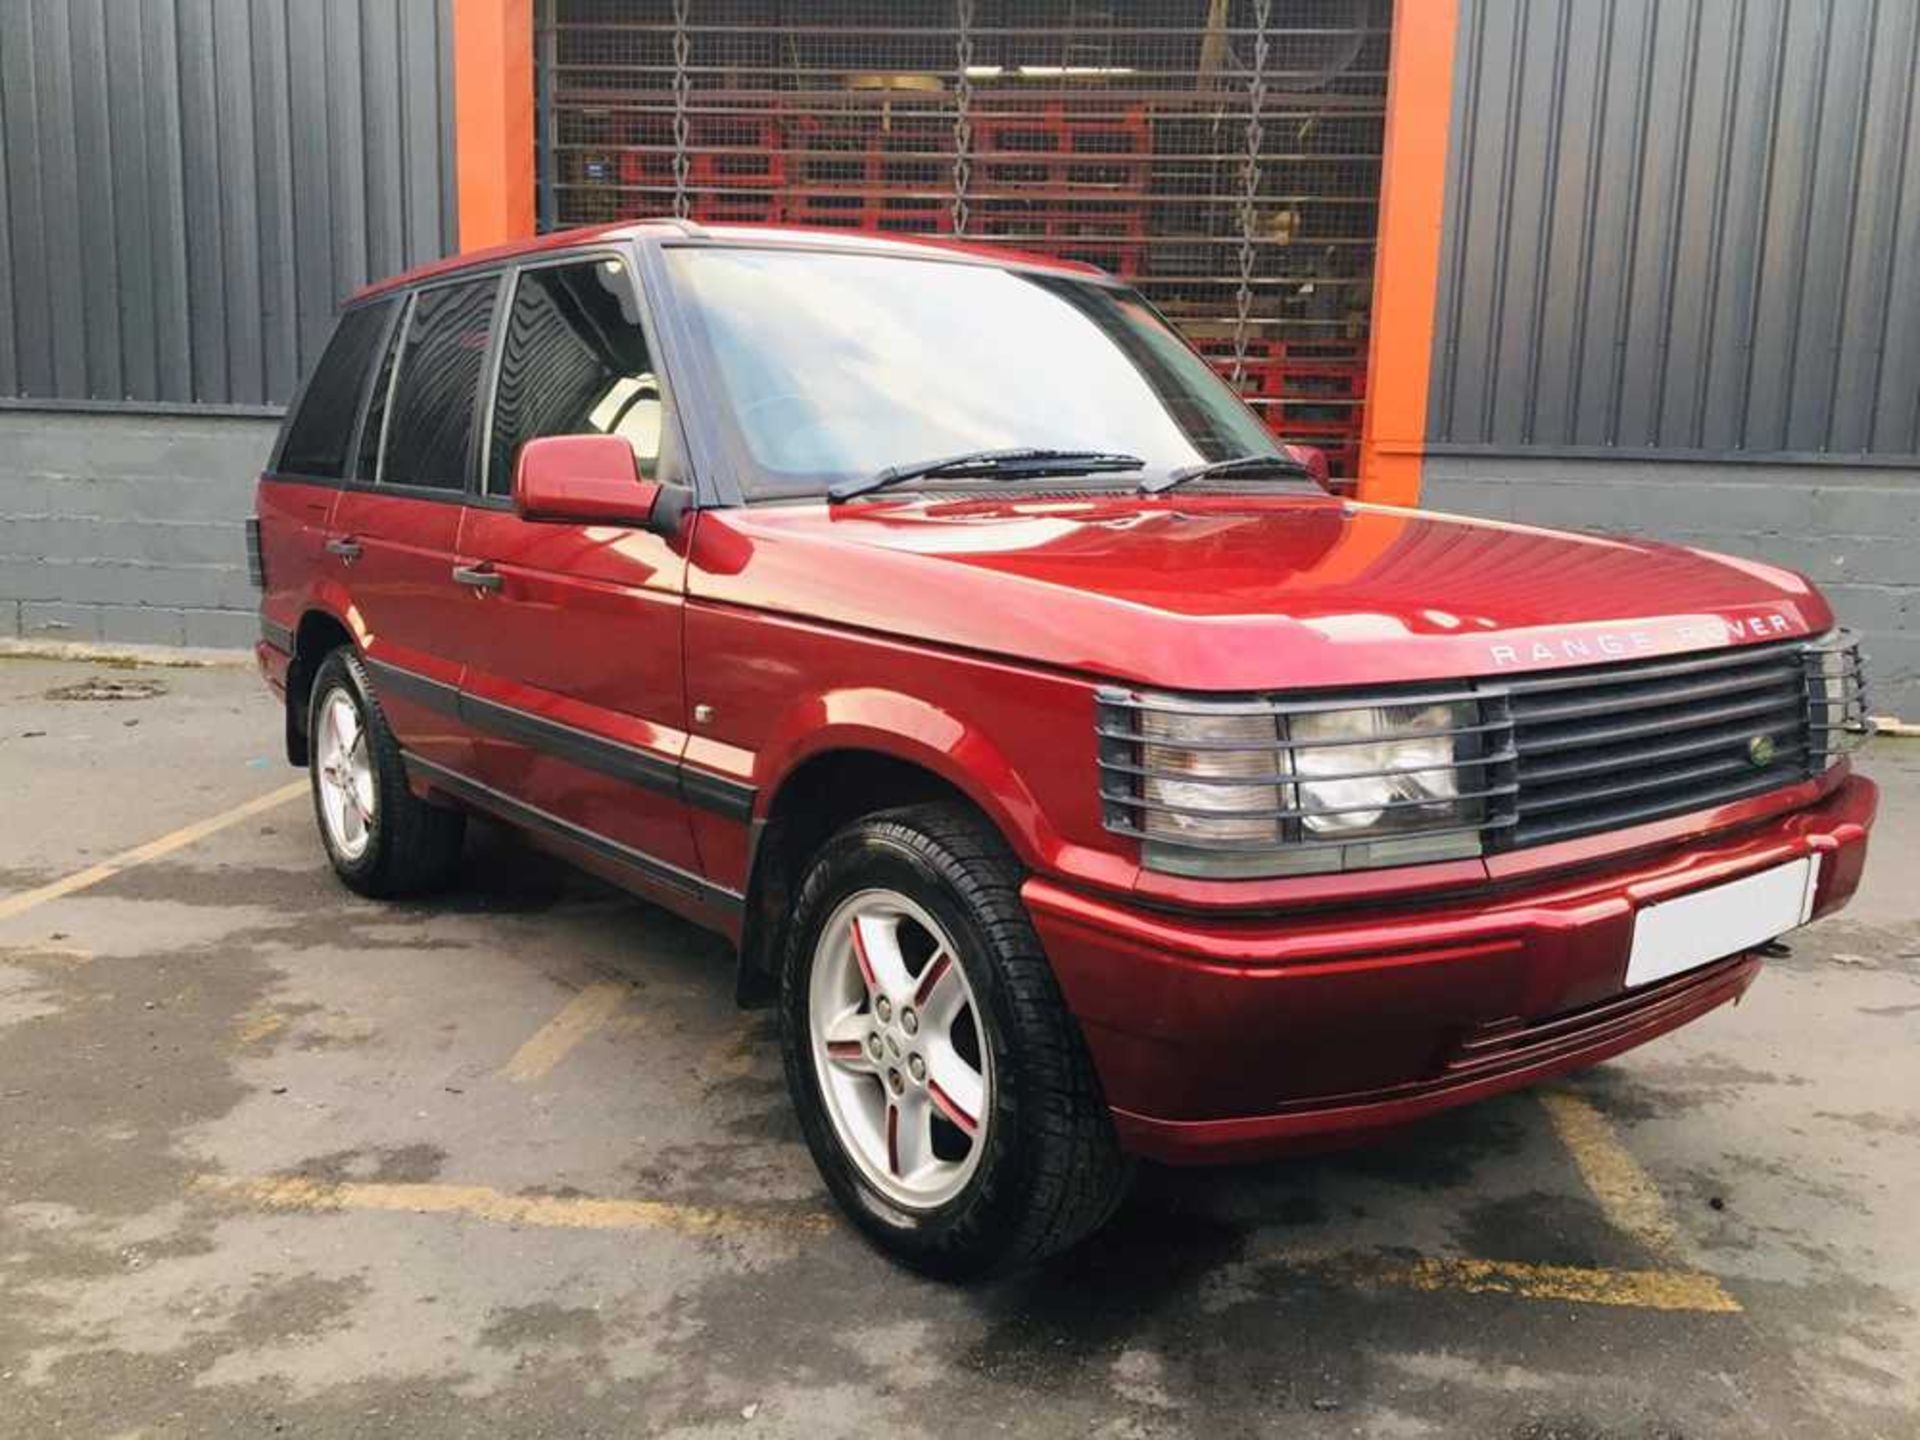 2001 Range Rover 2.5 TD Bordeaux One of just 200 UK-supplied limited edition 'Bordeaux' examples